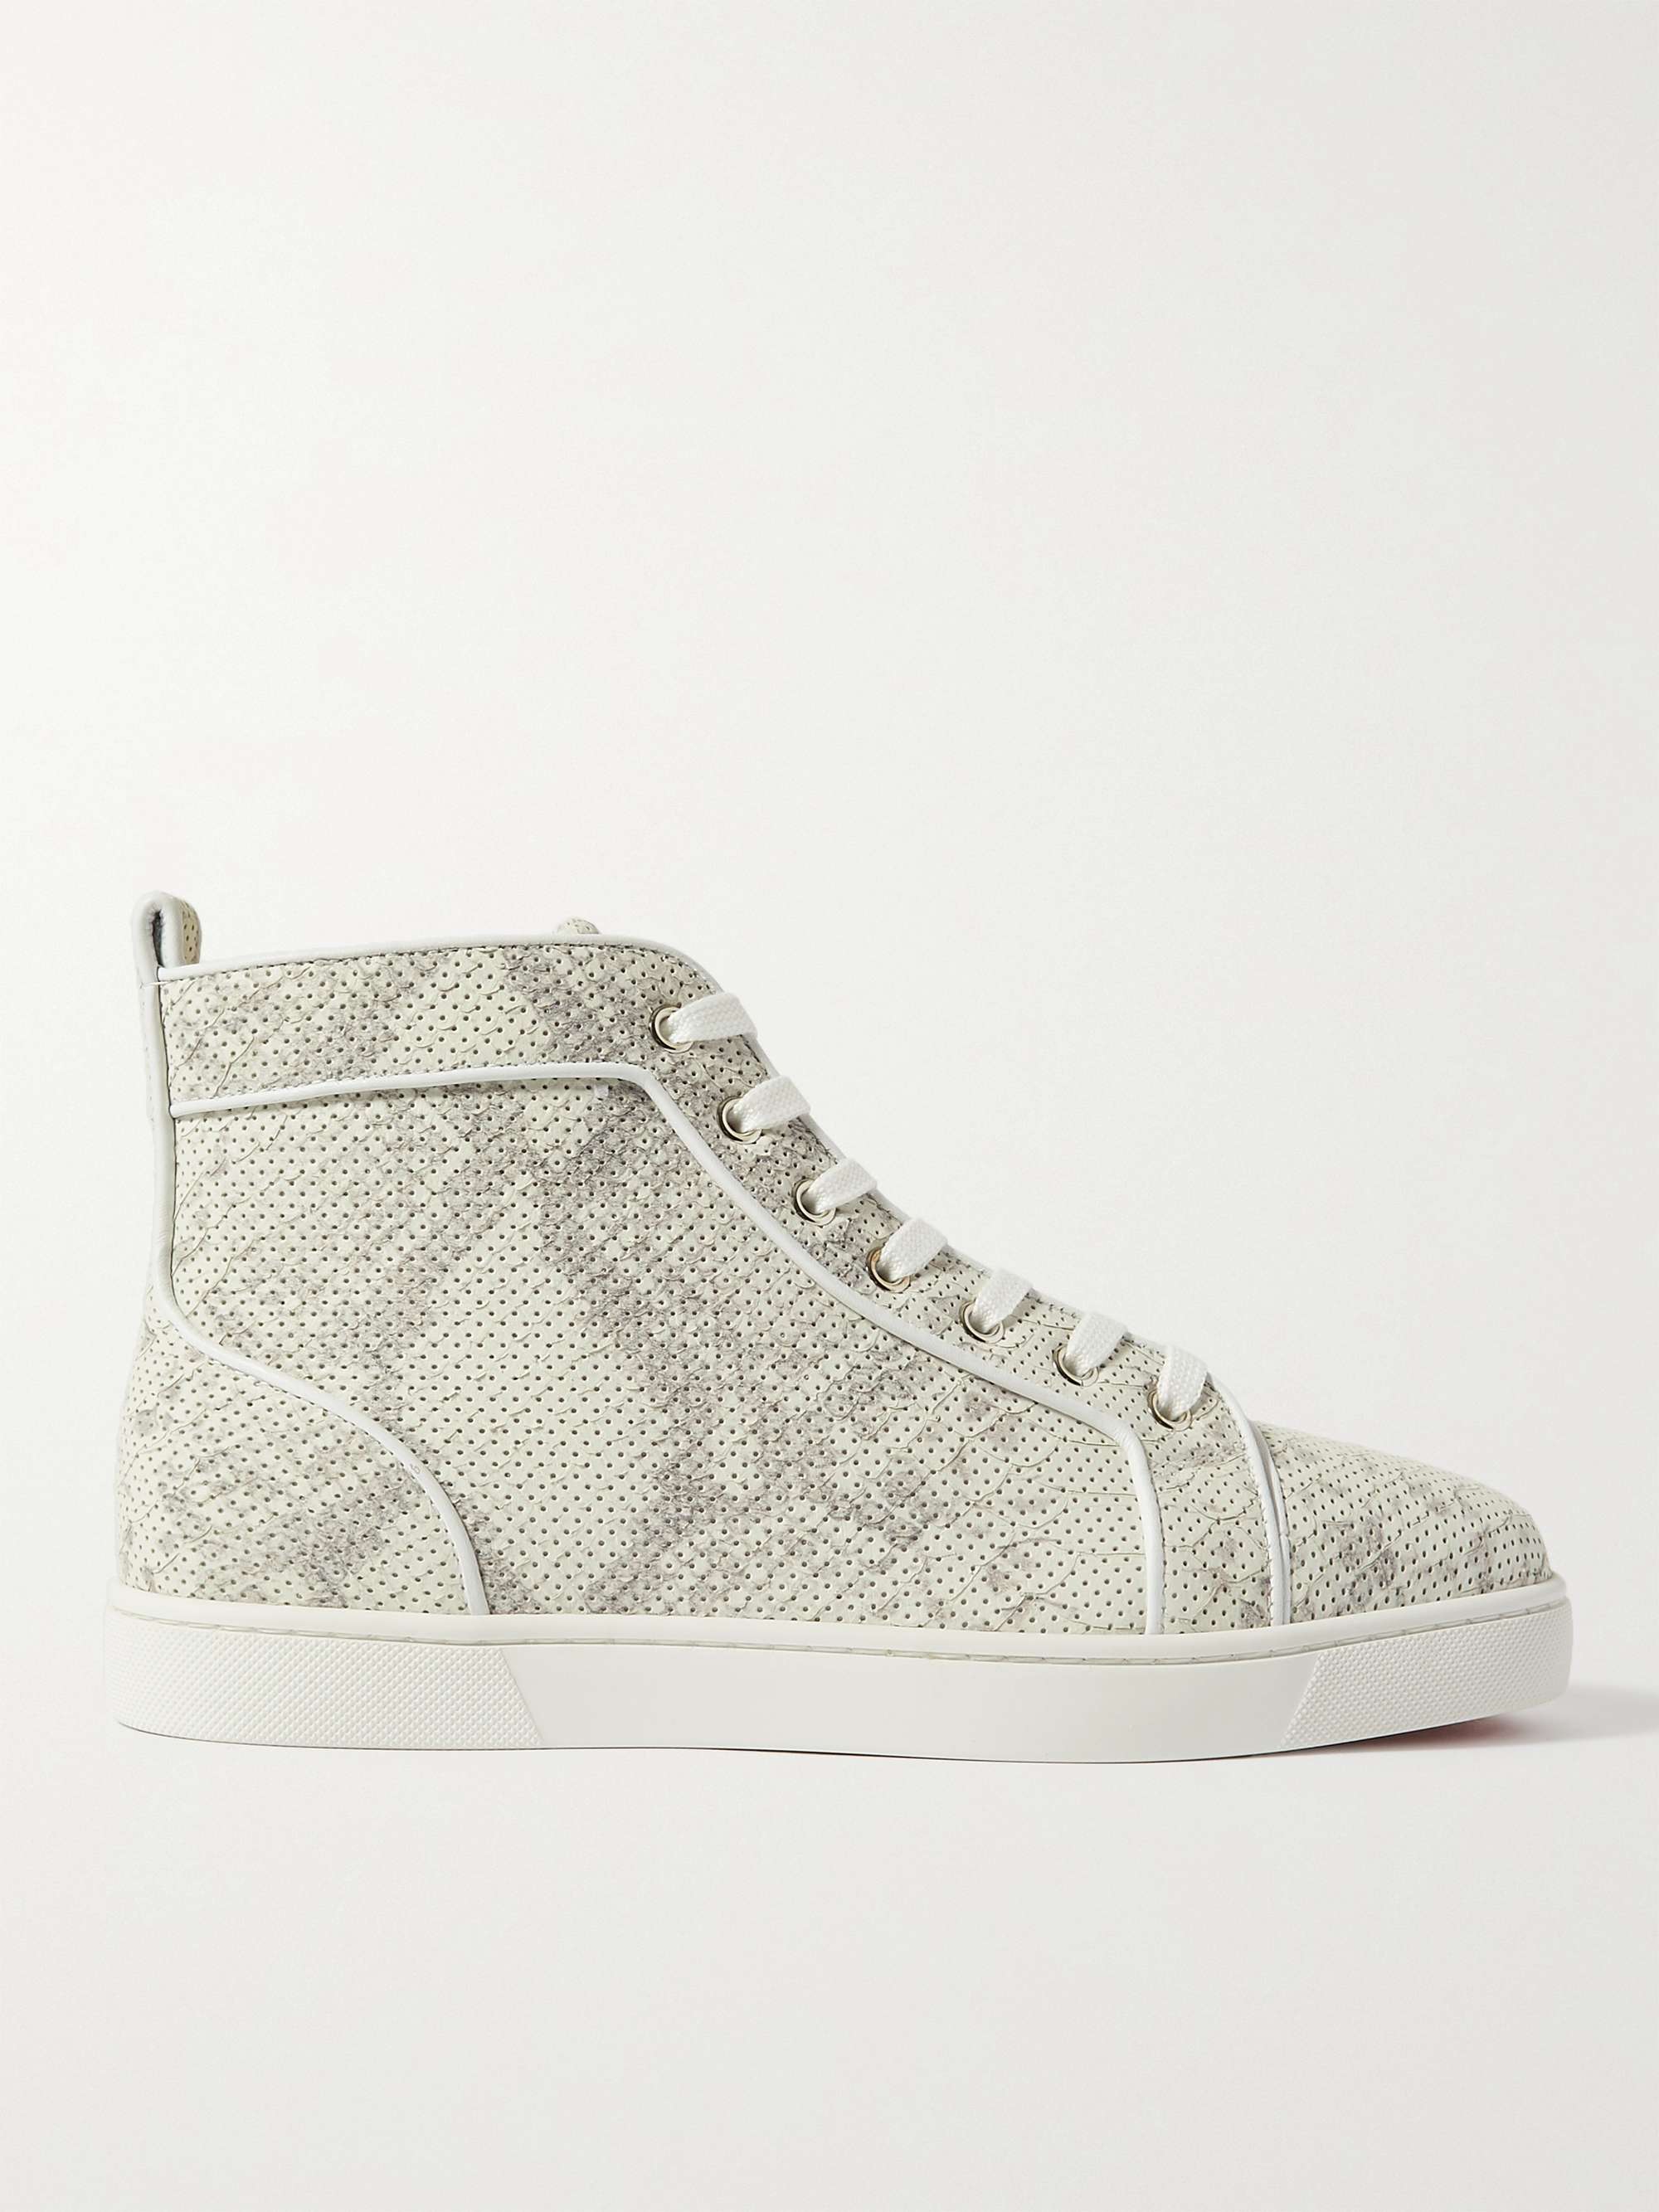 CHRISTIAN LOUBOUTIN Louis Perforated Snake-Effect Leather High-Top Sneakers